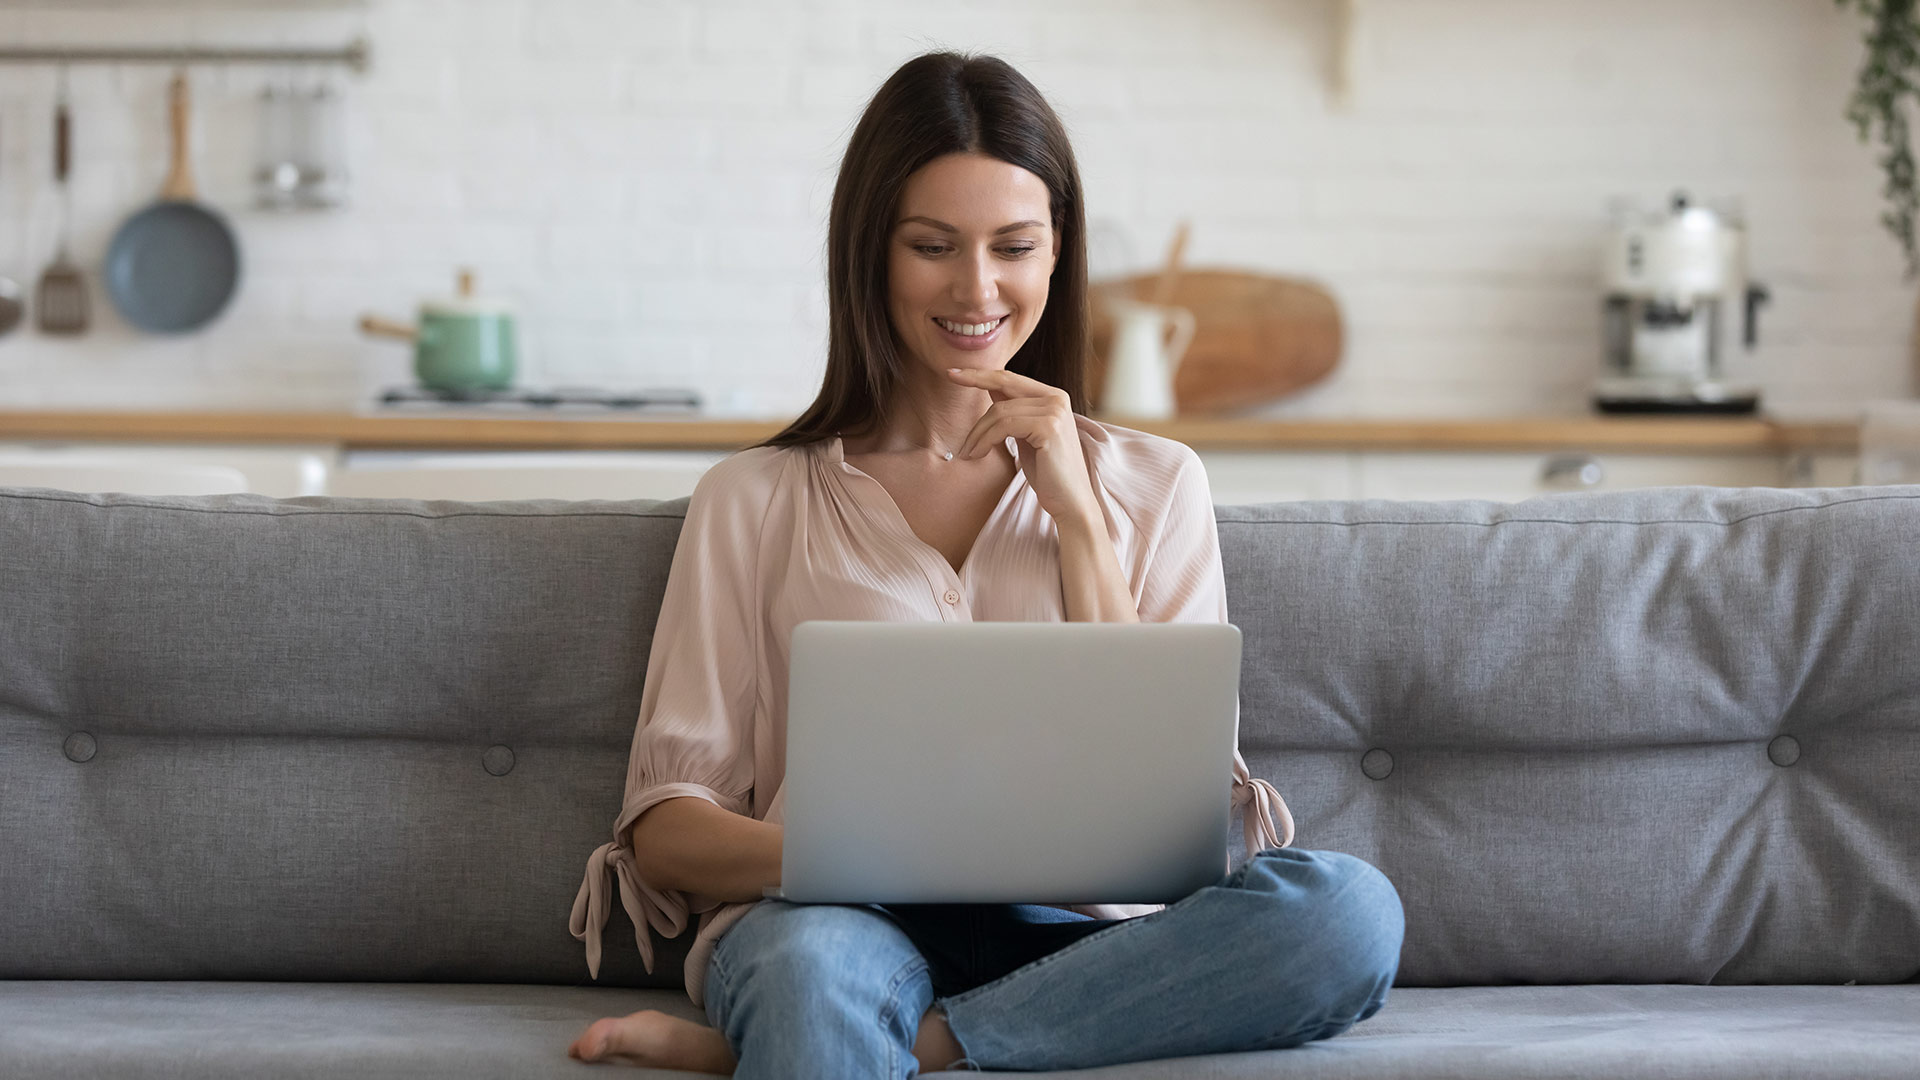 Brunette woman smiling while looking at her laptop screen. She is sitting on a grey couch with a kitchen counter behind it.